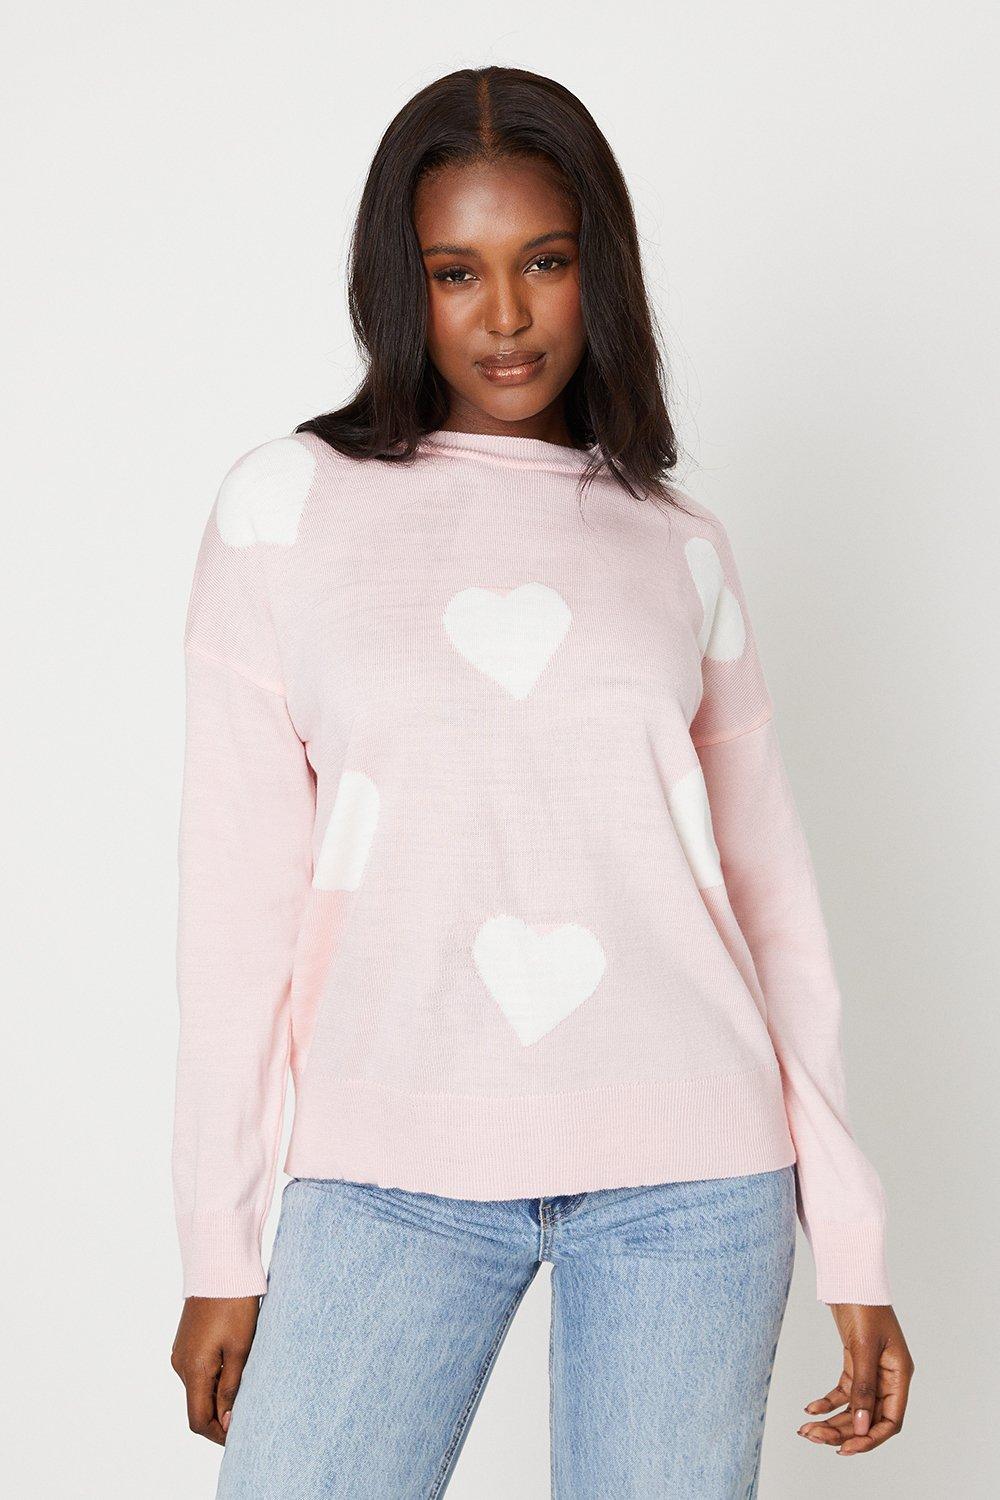 Women’s Crew Neck All Over Heart Print Knitted Jumper - blush - L